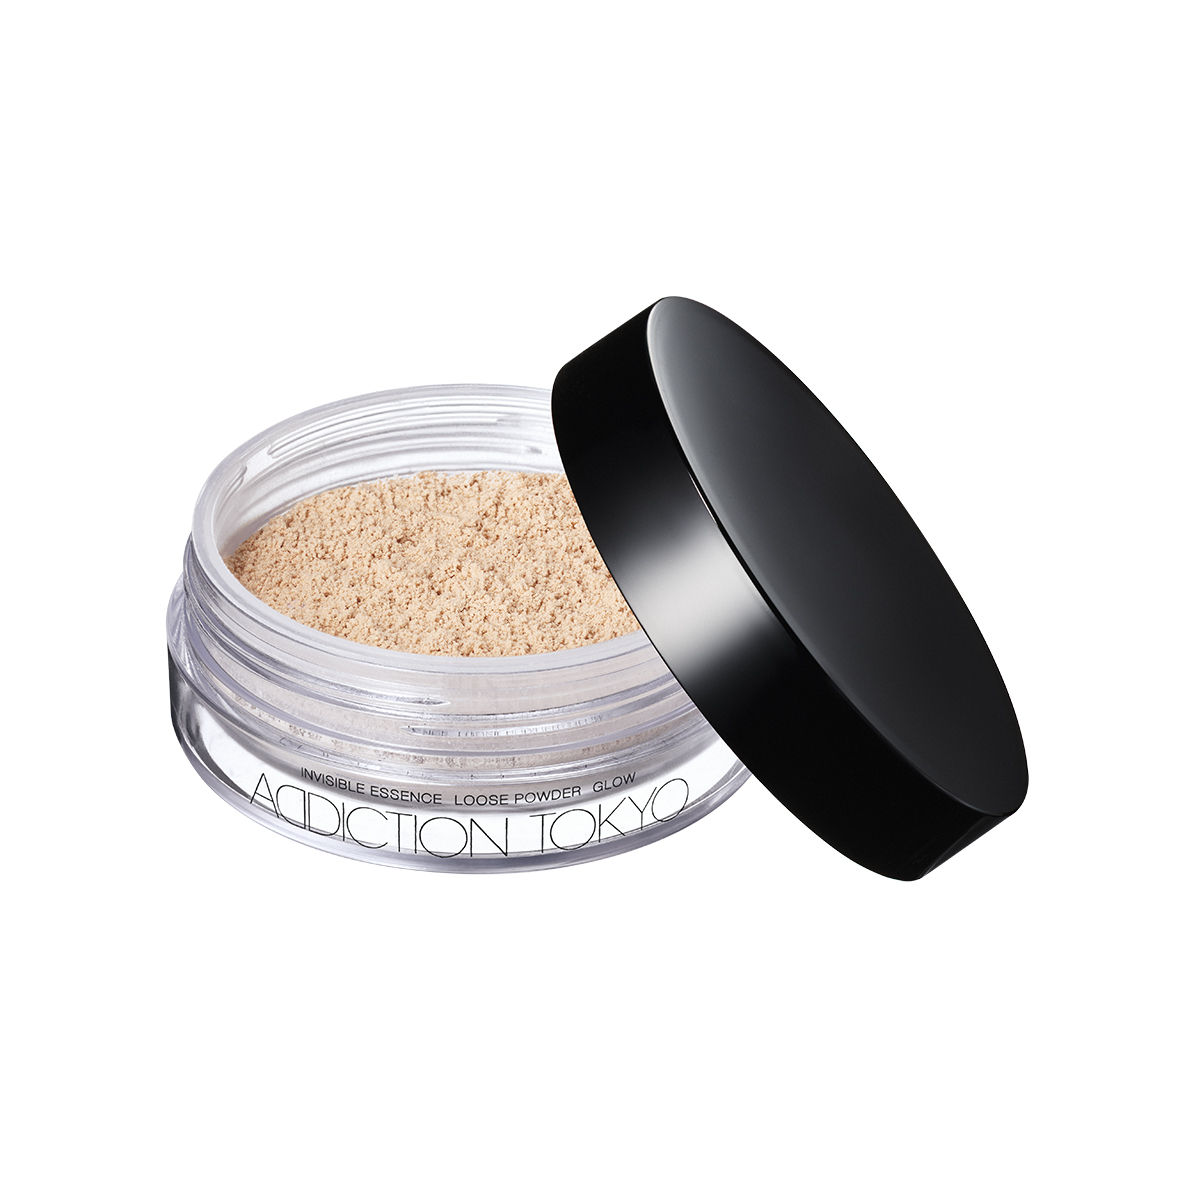 INVISIBLE ESSENCE LOOSE POWDER GLOW